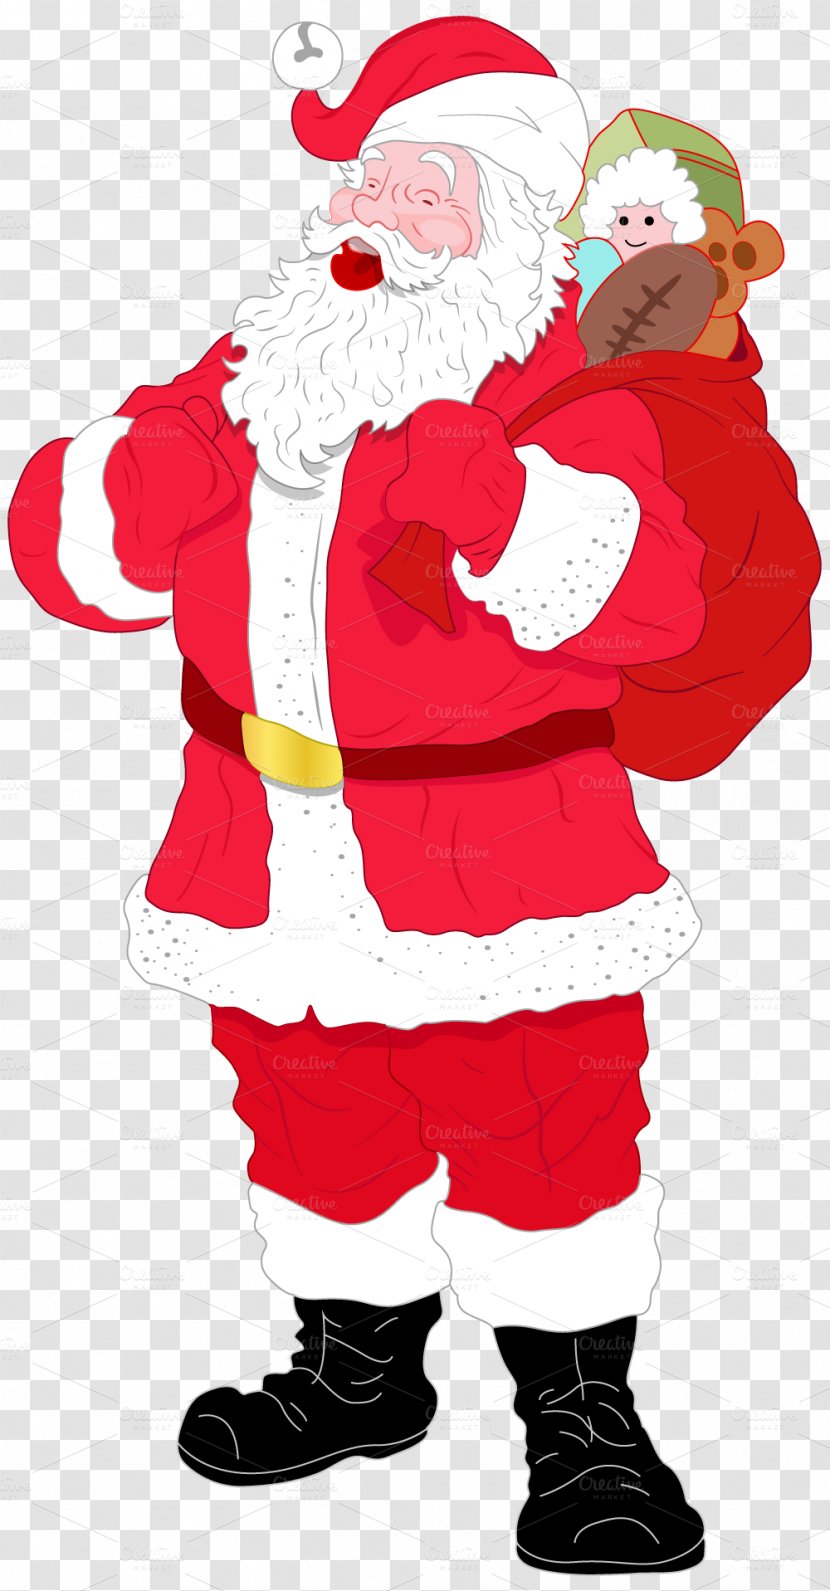 Santa Claus Vector Graphics Illustration IStock - Photography Transparent PNG